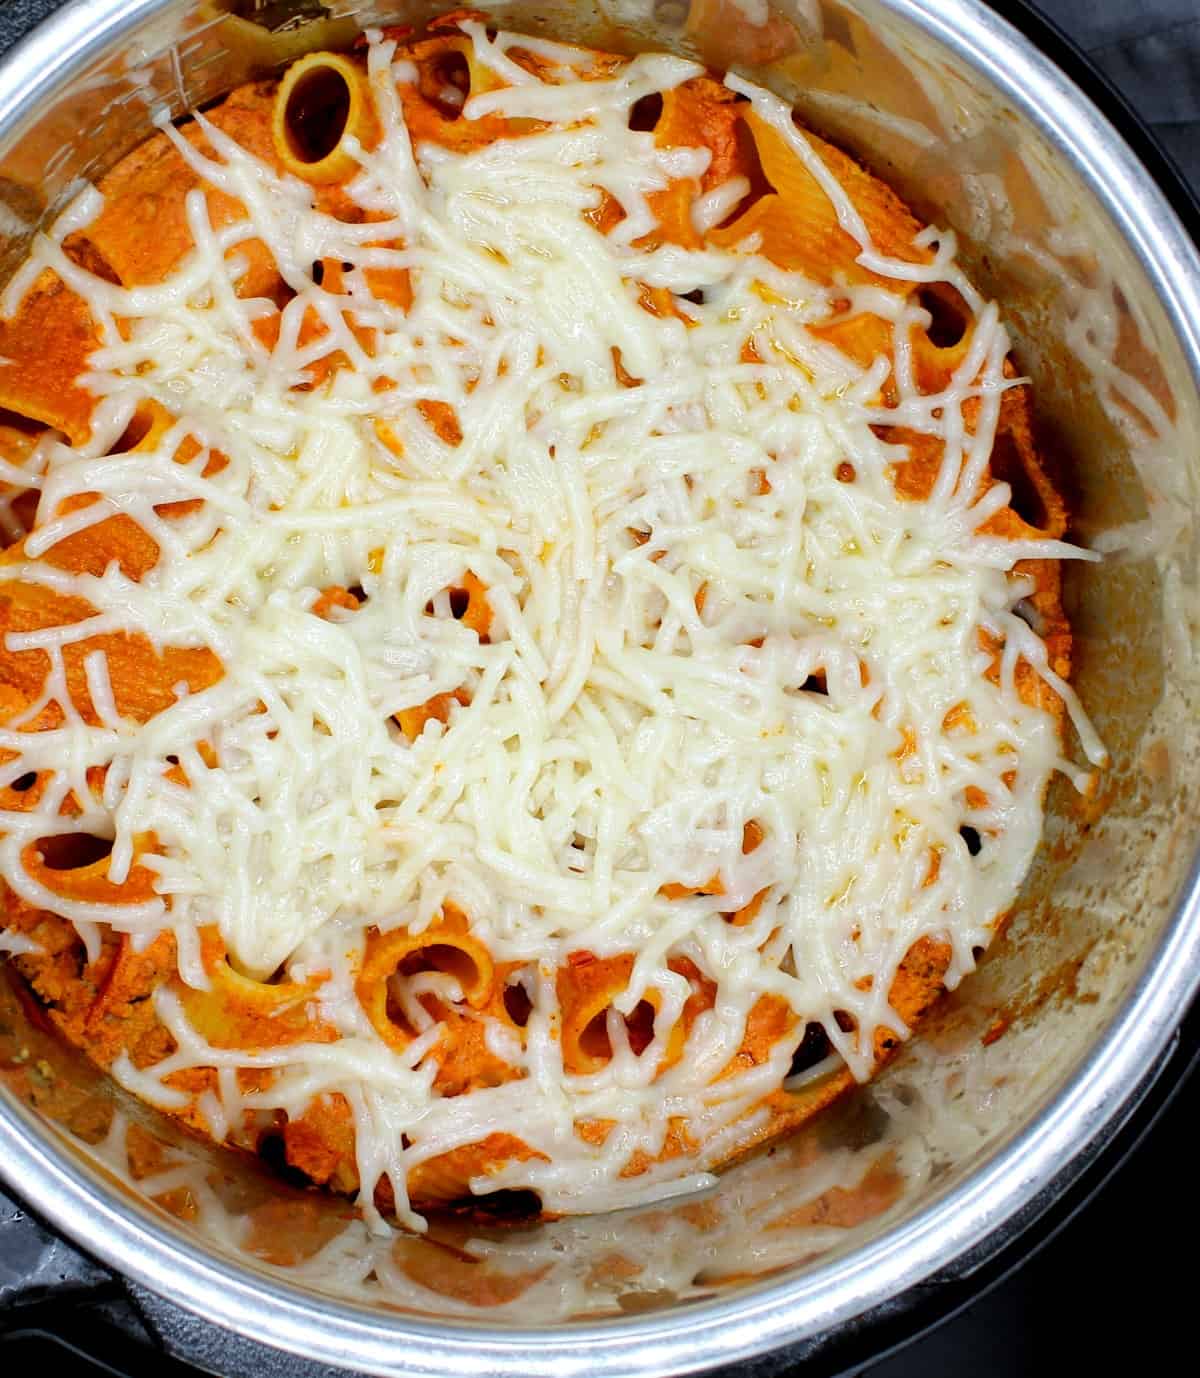 An overhead shot of an Instant Pot liner with freshly baked creamy, cheesy vegan pasta bake with rigatoni, shreds of vegan mozzarella cheese and a gray napkin.